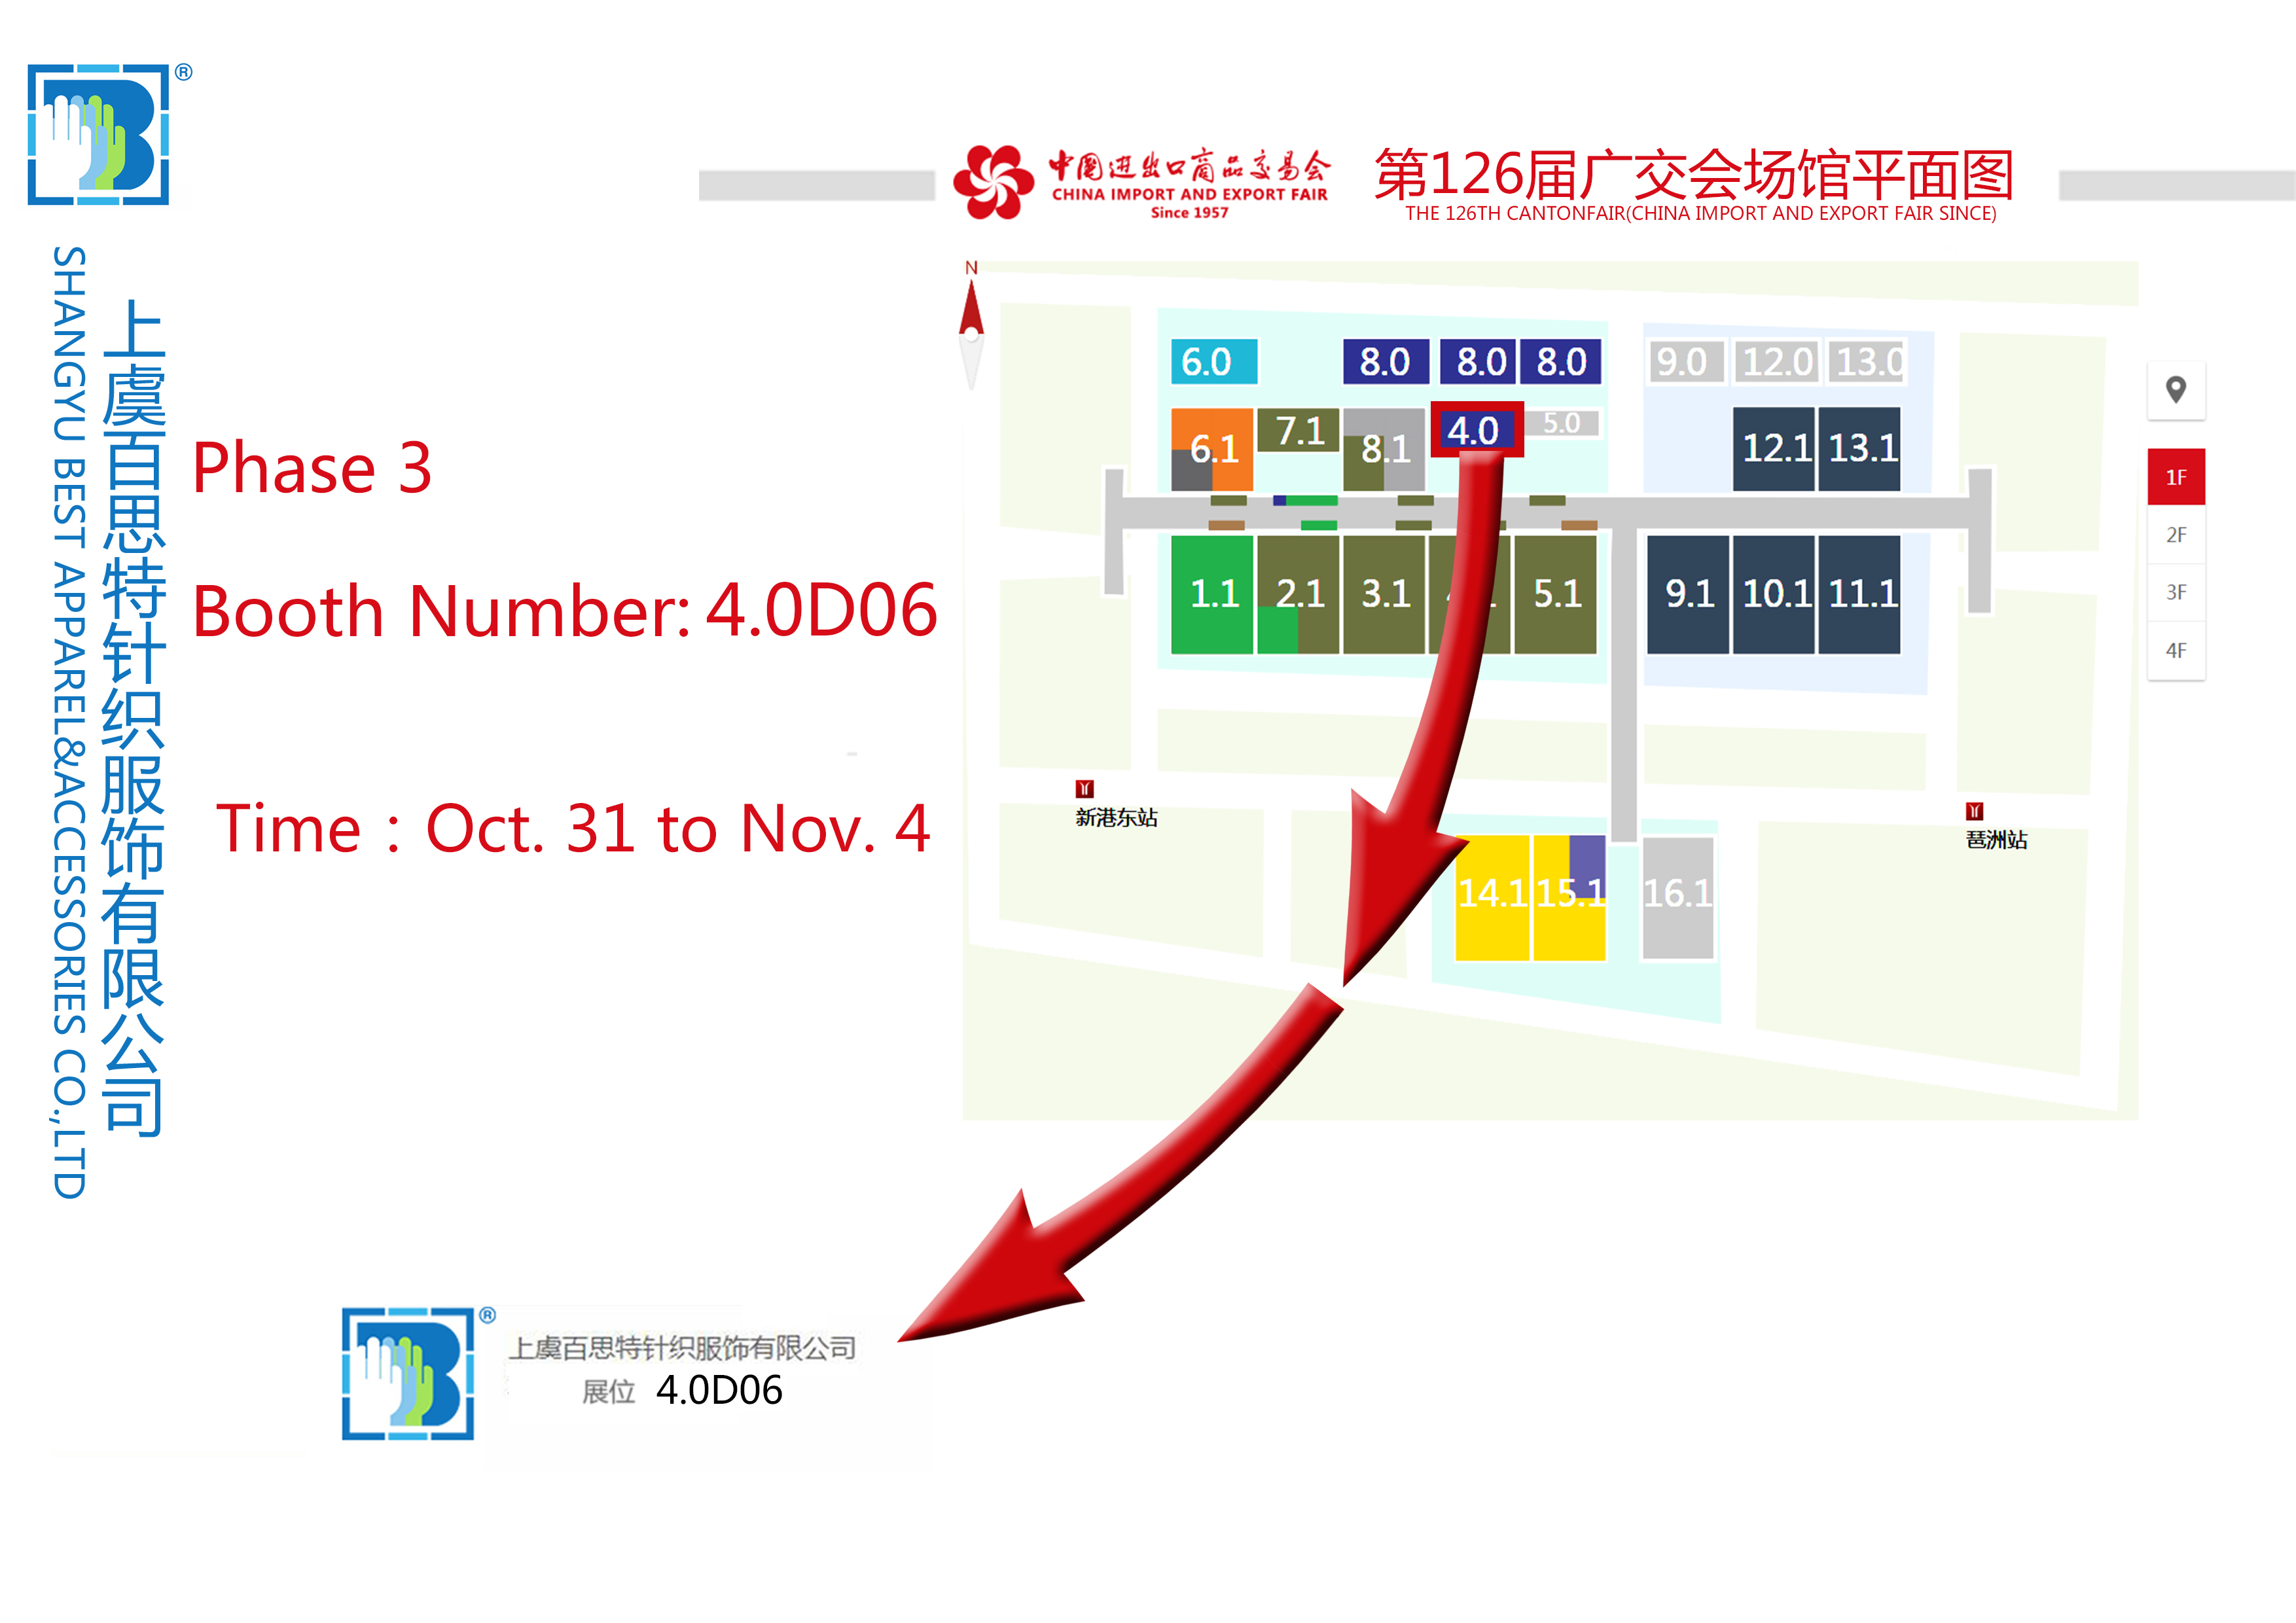 WE WILL PARTICIPATE IN THE 126TH CANTON FAIR-Phase 3